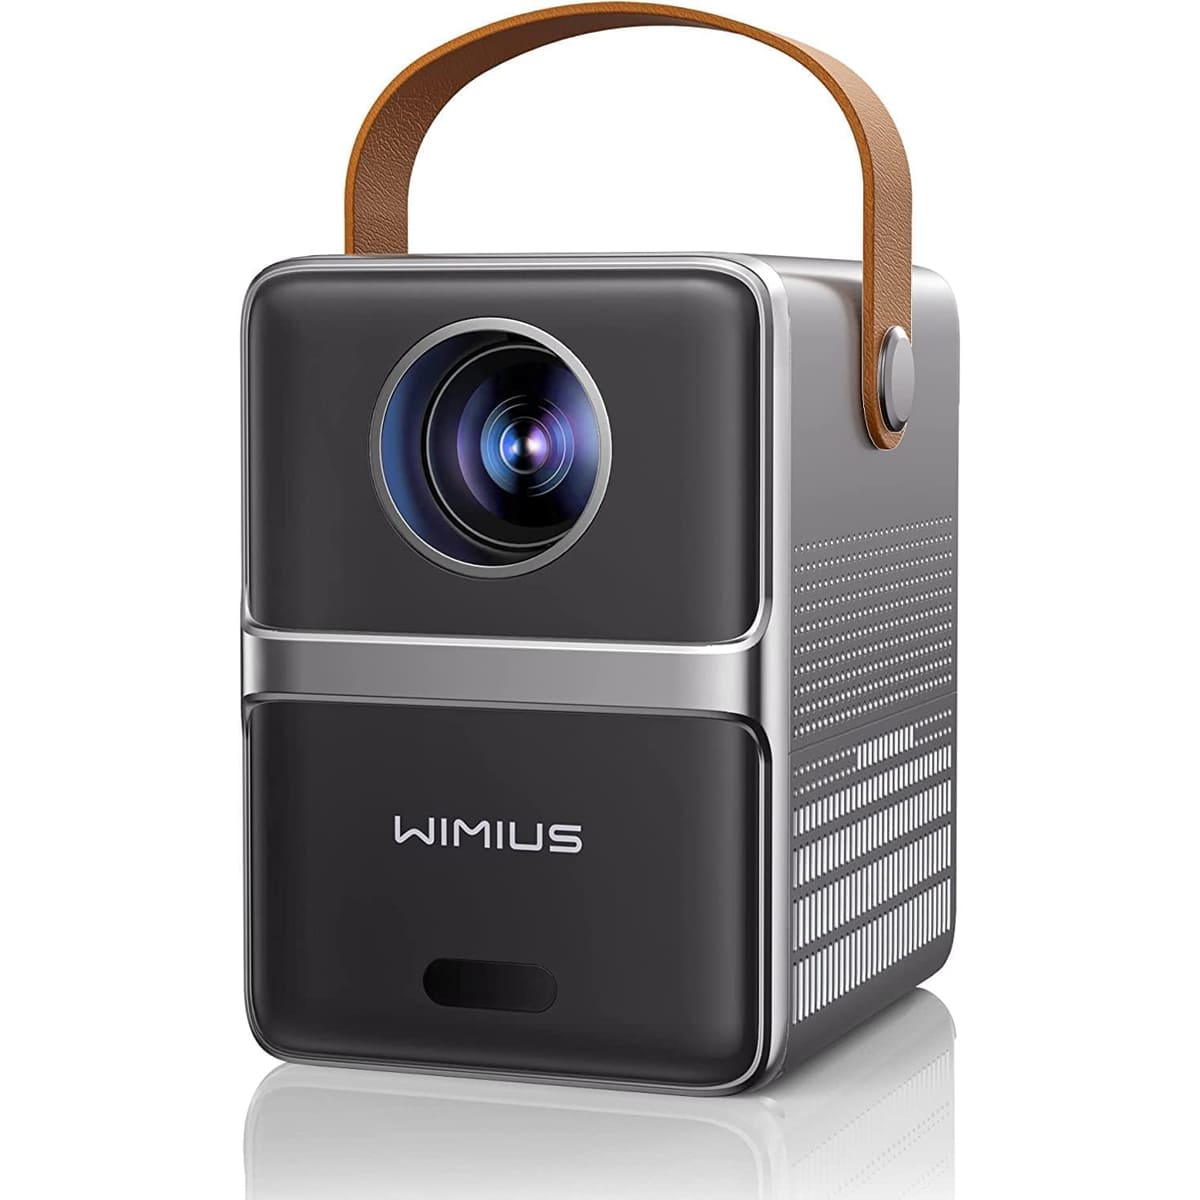 HY300 cheaper portable projector now available globally -   News